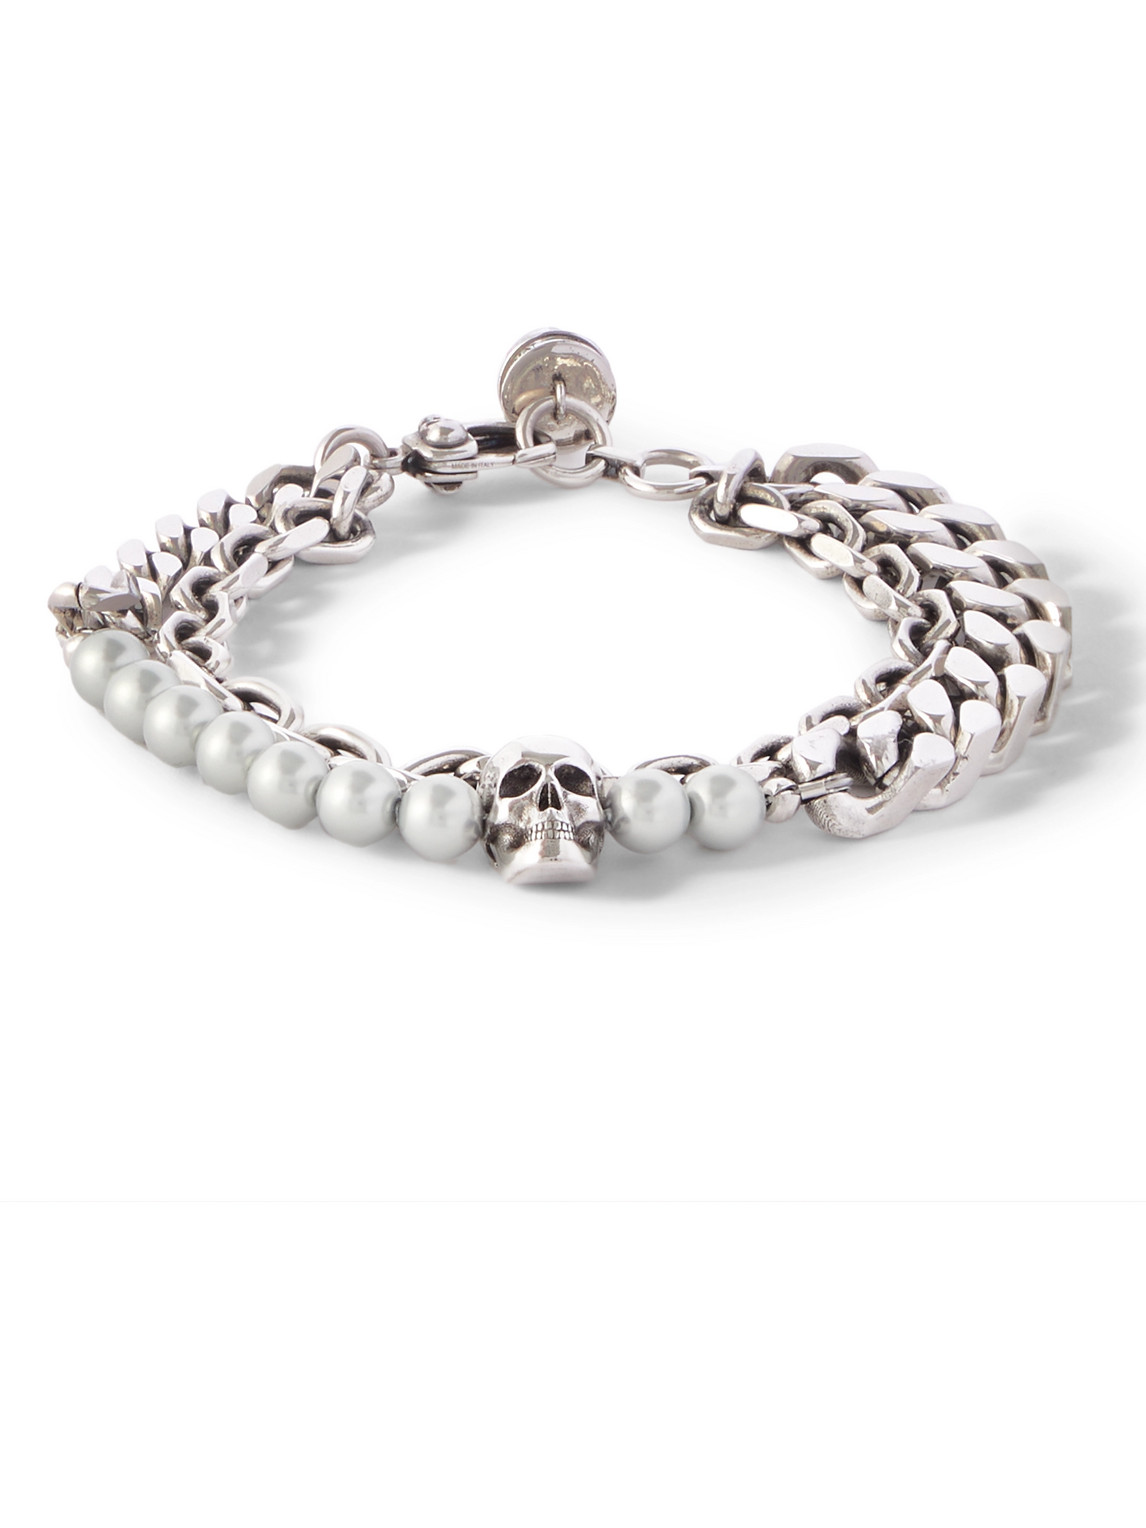 Silver-Tone and Faux Pearl Chain Bracelet